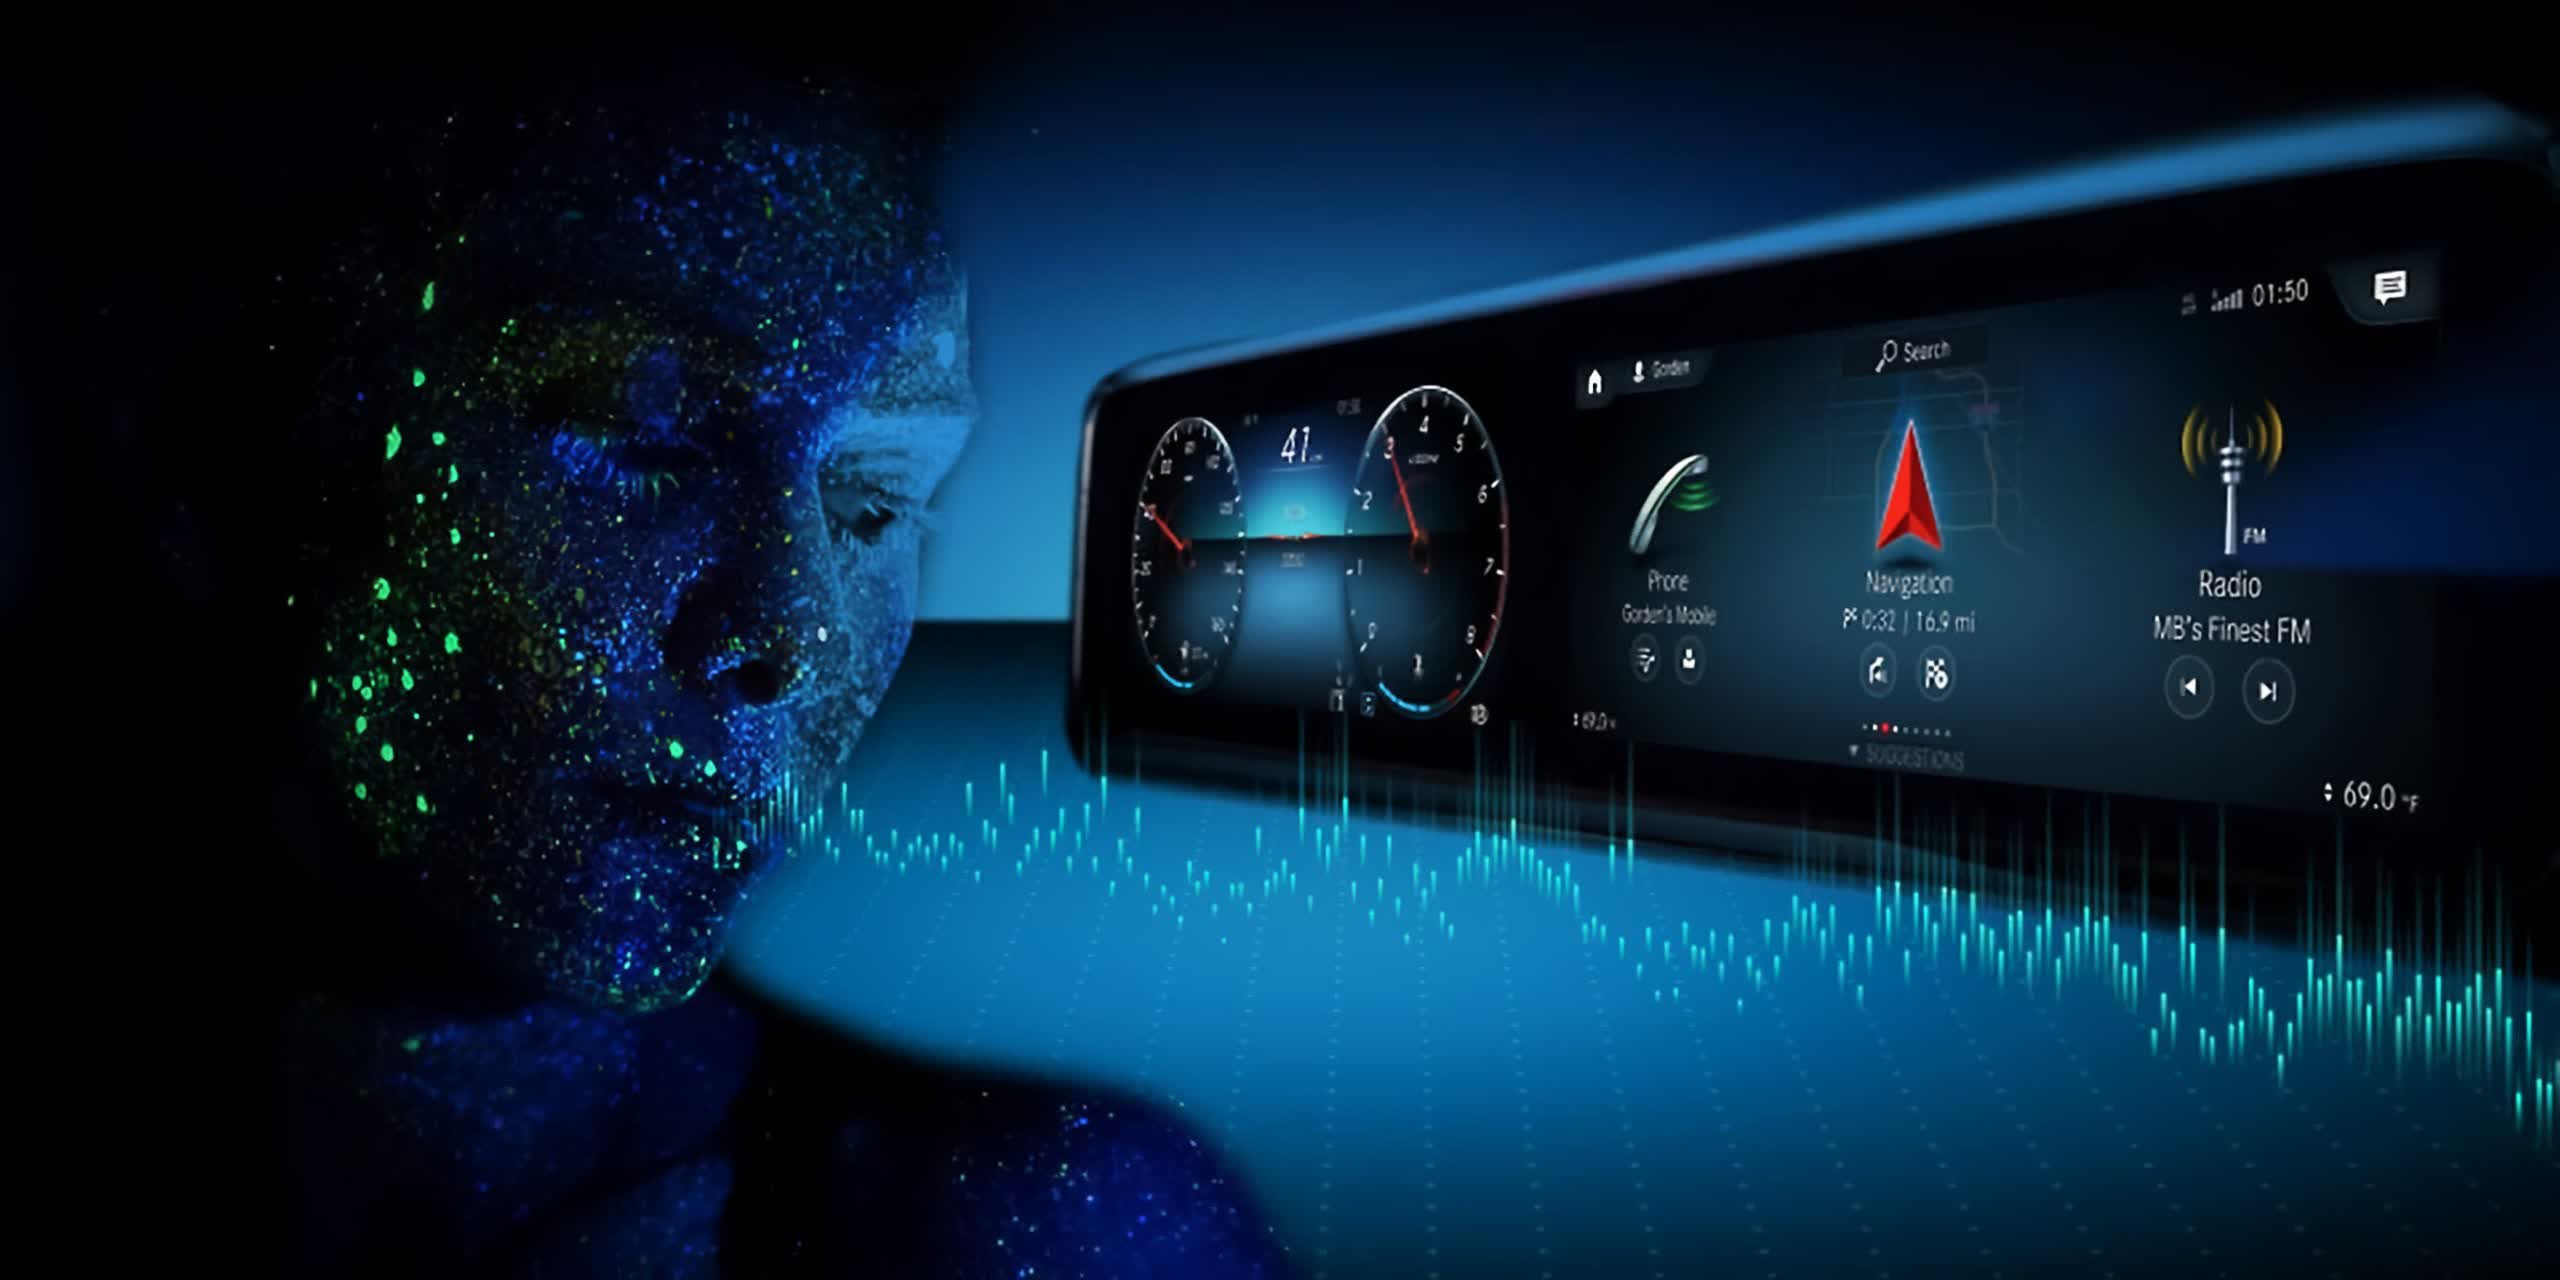 Mercedes-Benz is the first carmaker to integrate ChatGPT into its voice-control system